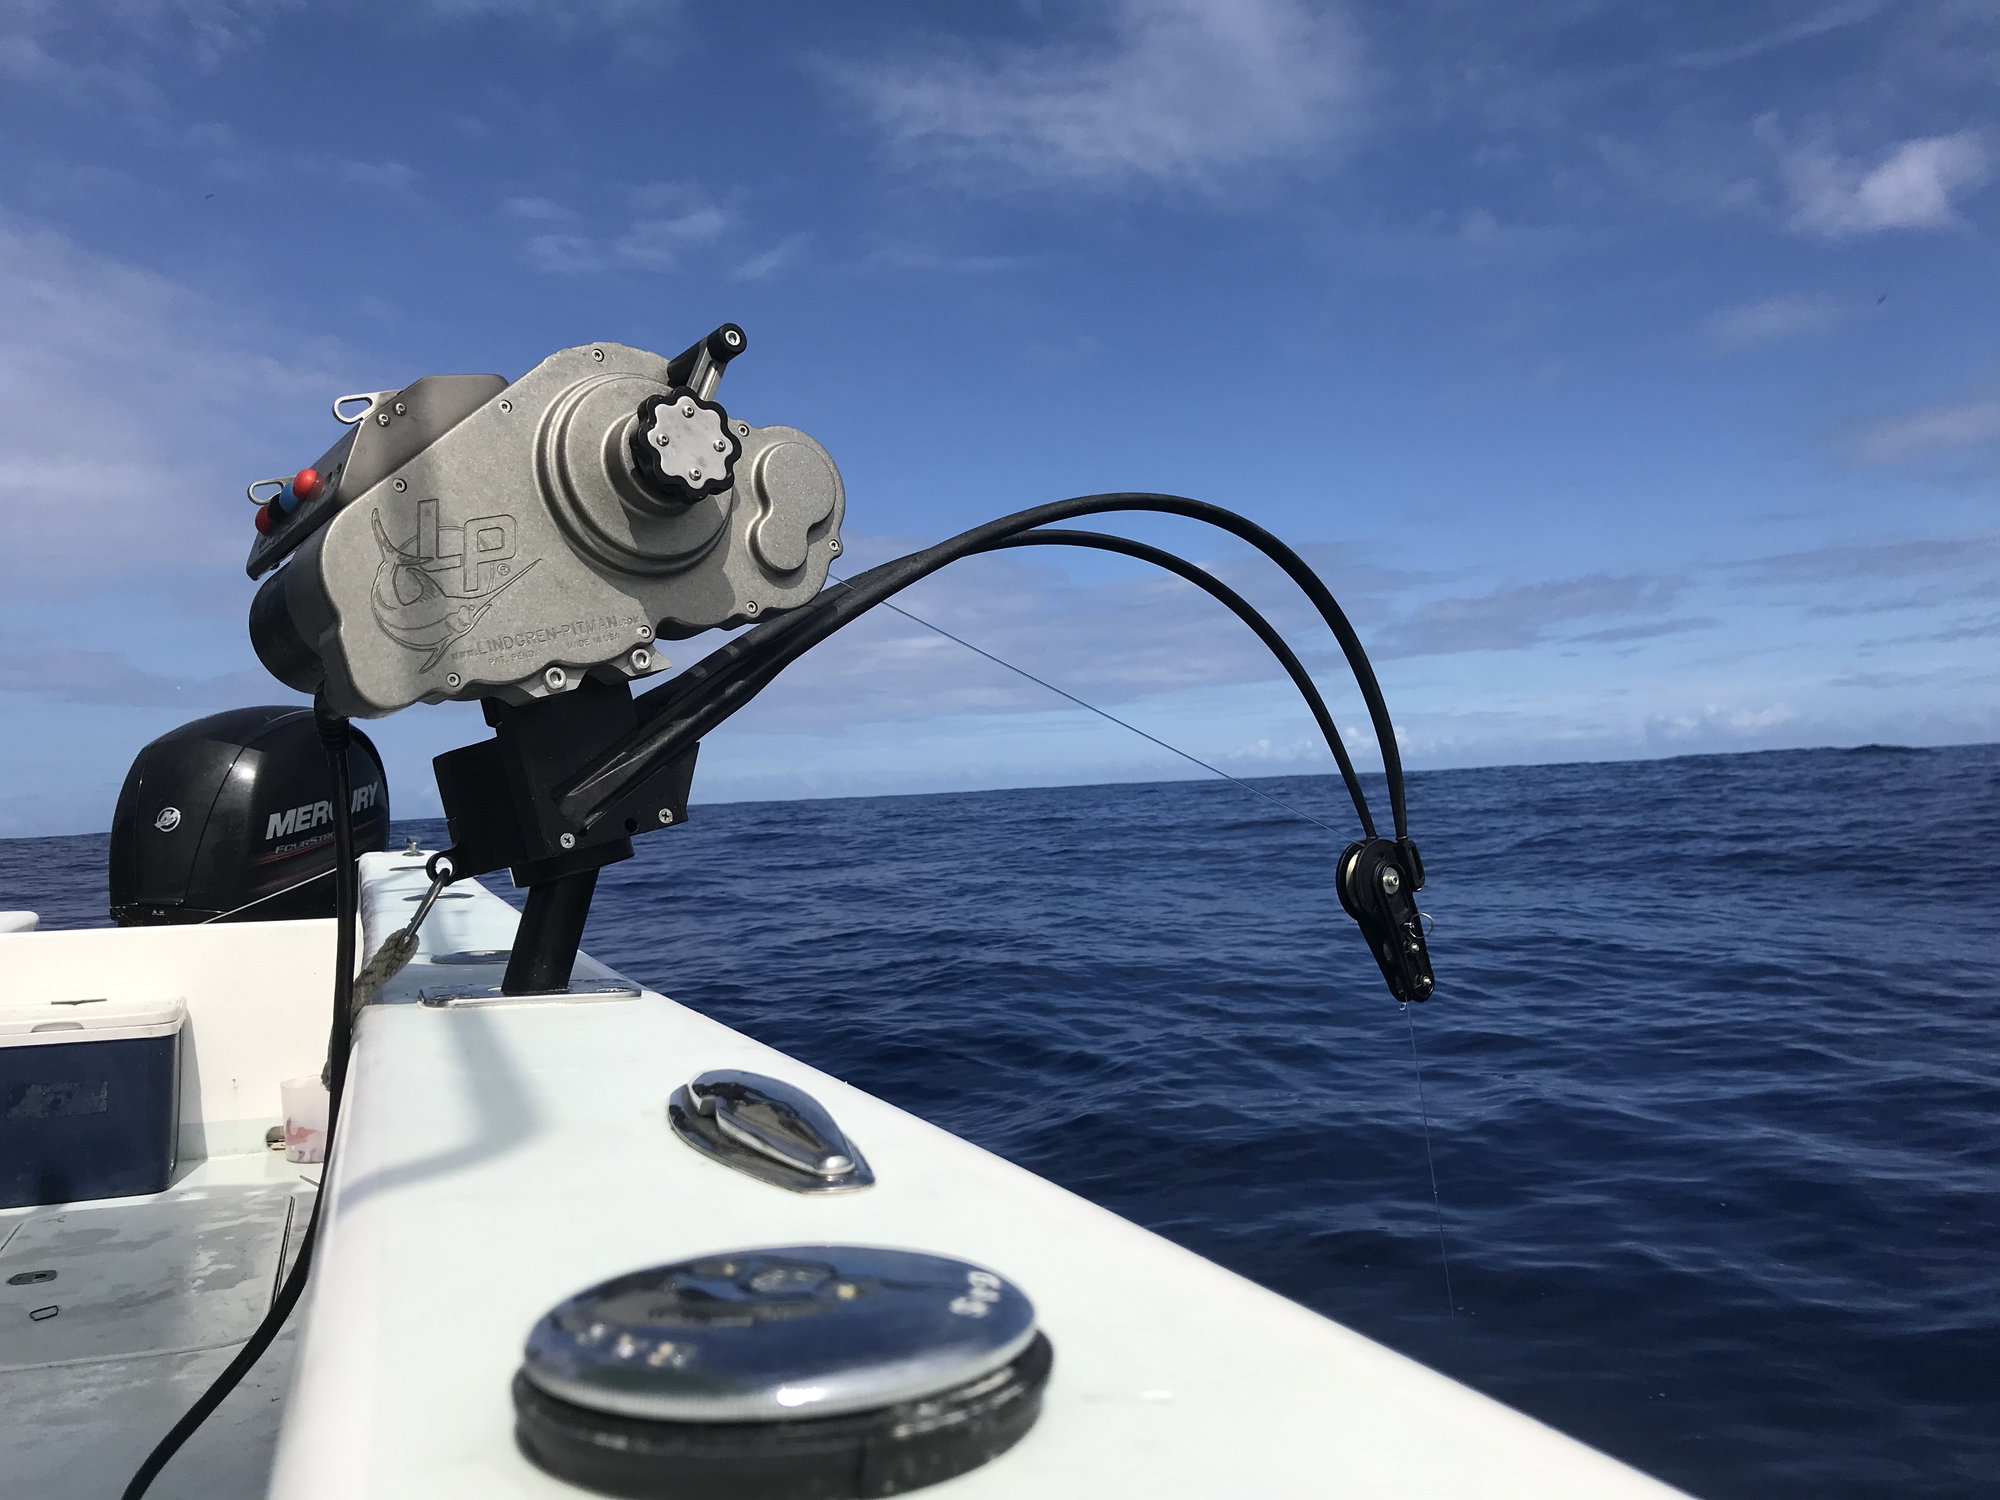 fishing rod holder on front bumper.? - The Hull Truth - Boating